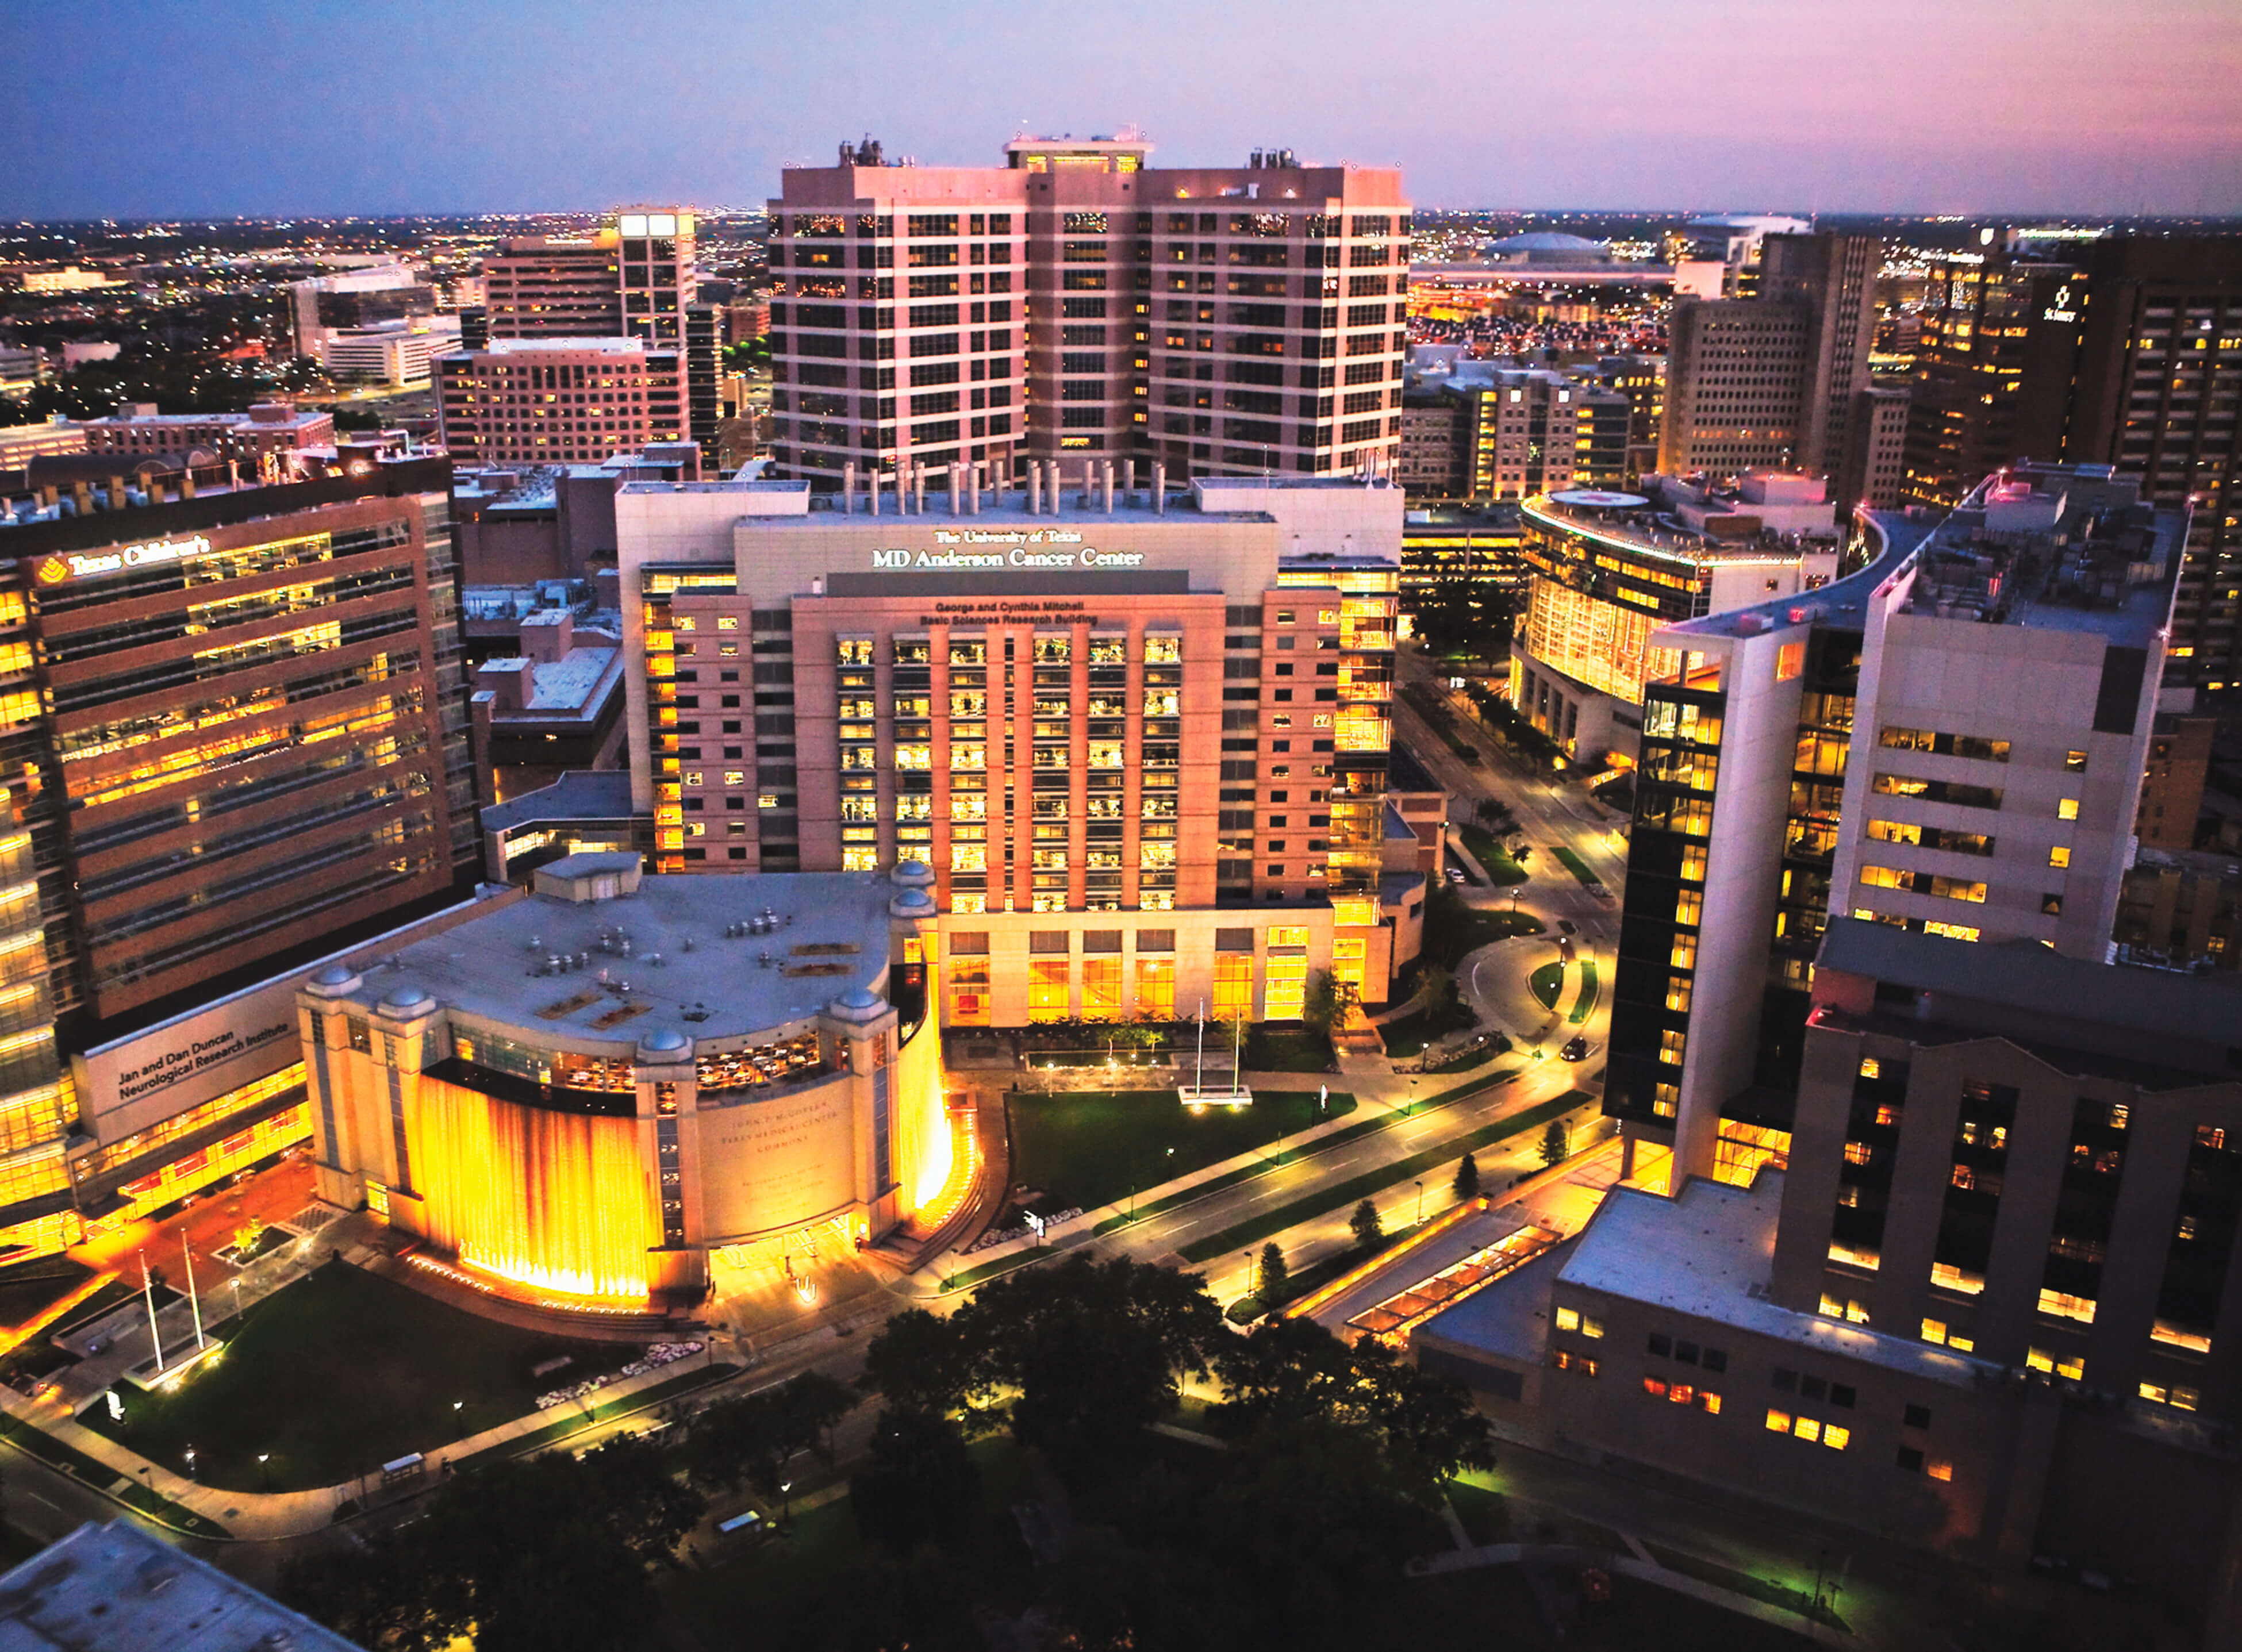 Today, the Texas Medical Center has 54 member institutions, composed of 27 government agencies and 27 not-for-profit health care facilities. This past year, 7.1 million patients visited institutions within the Texas Medical Center. (Credit: Texas Medical Center)